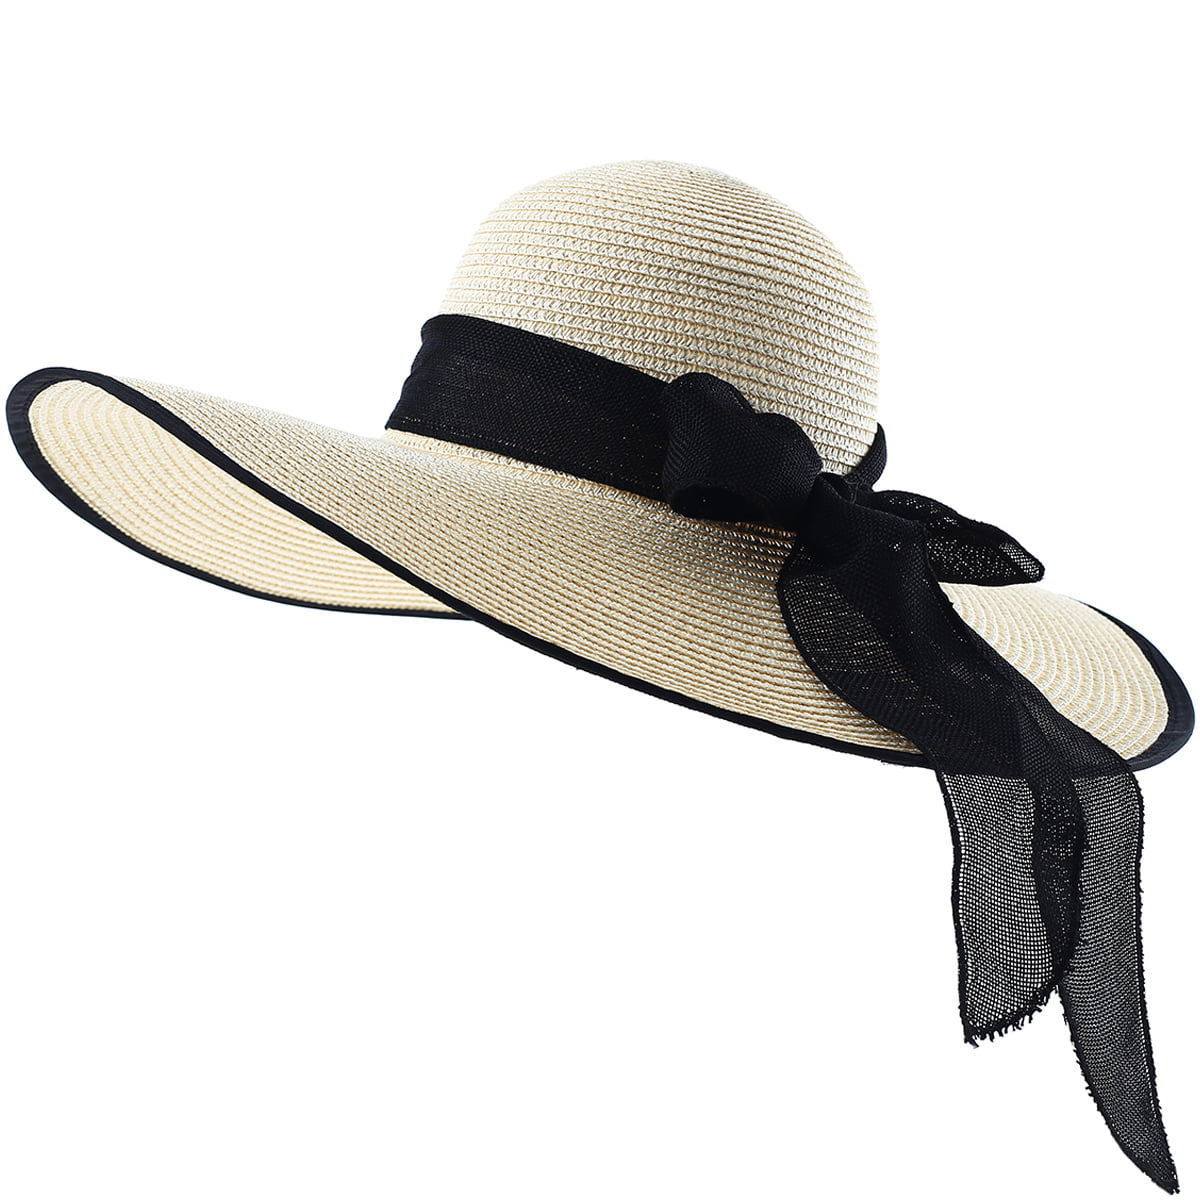 Dowager Floppy Beach Hat Wide Brim Straw Sunhat for Women with String Bow 